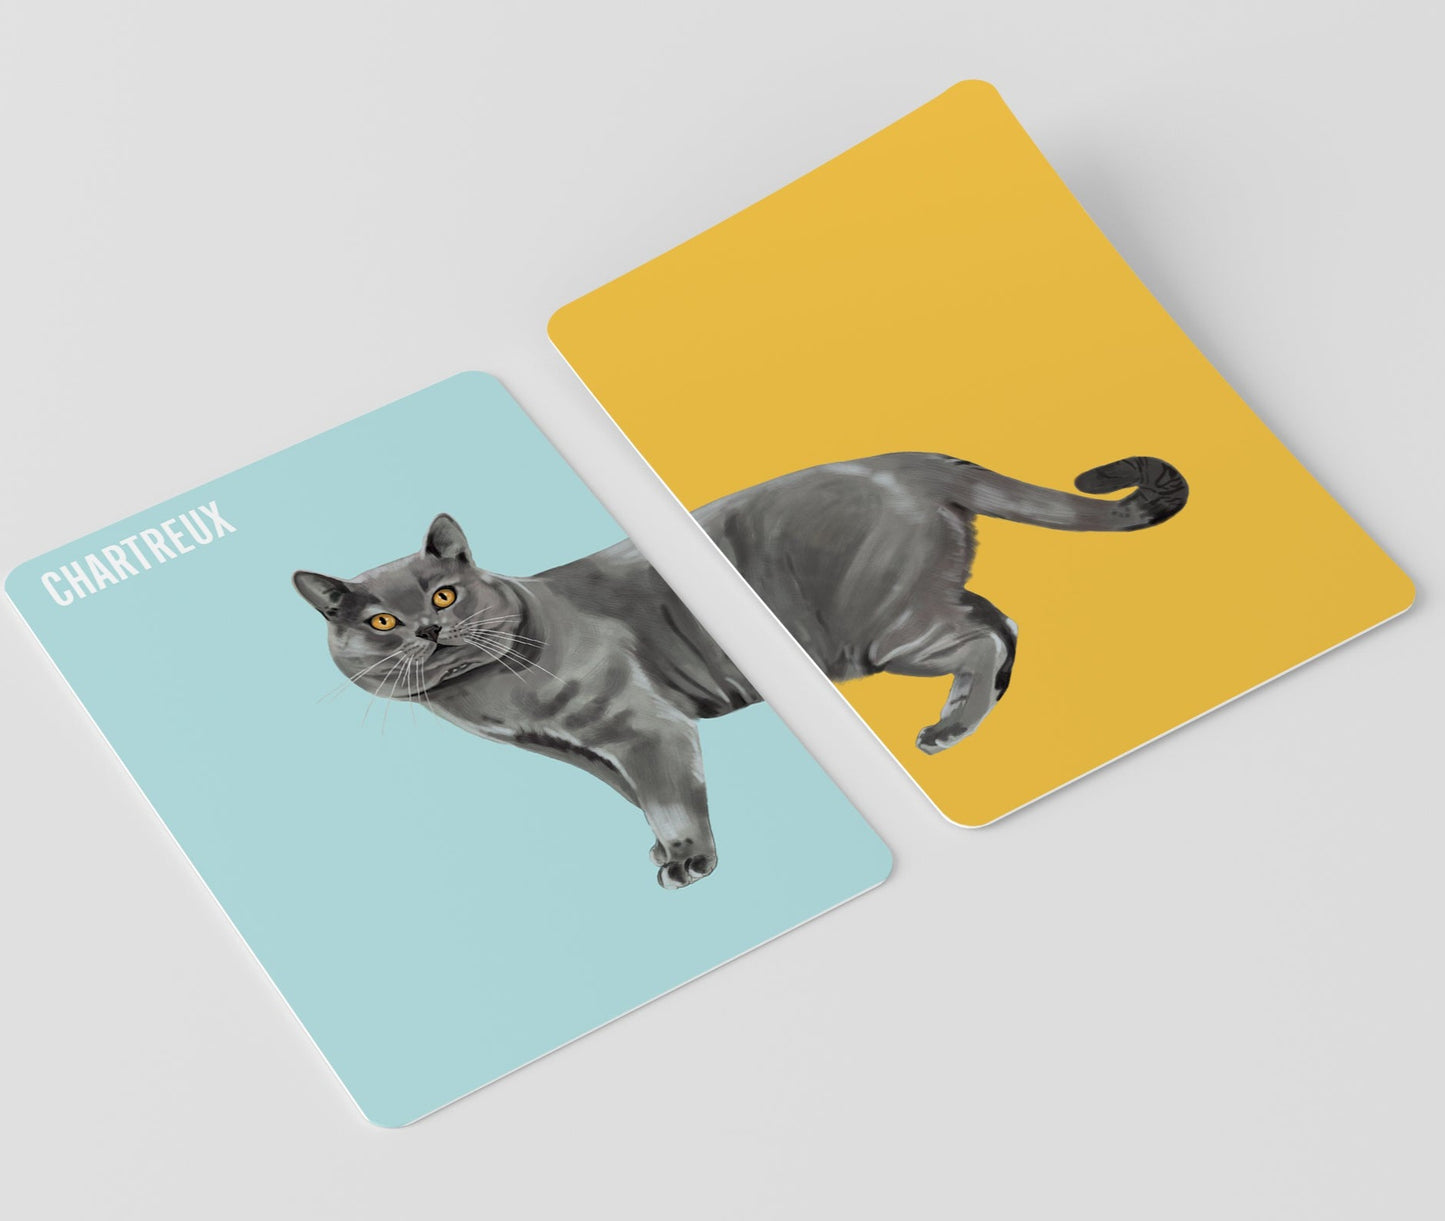 Heads & Tails: Cat Memory Cards - Match Up Iconic Cats